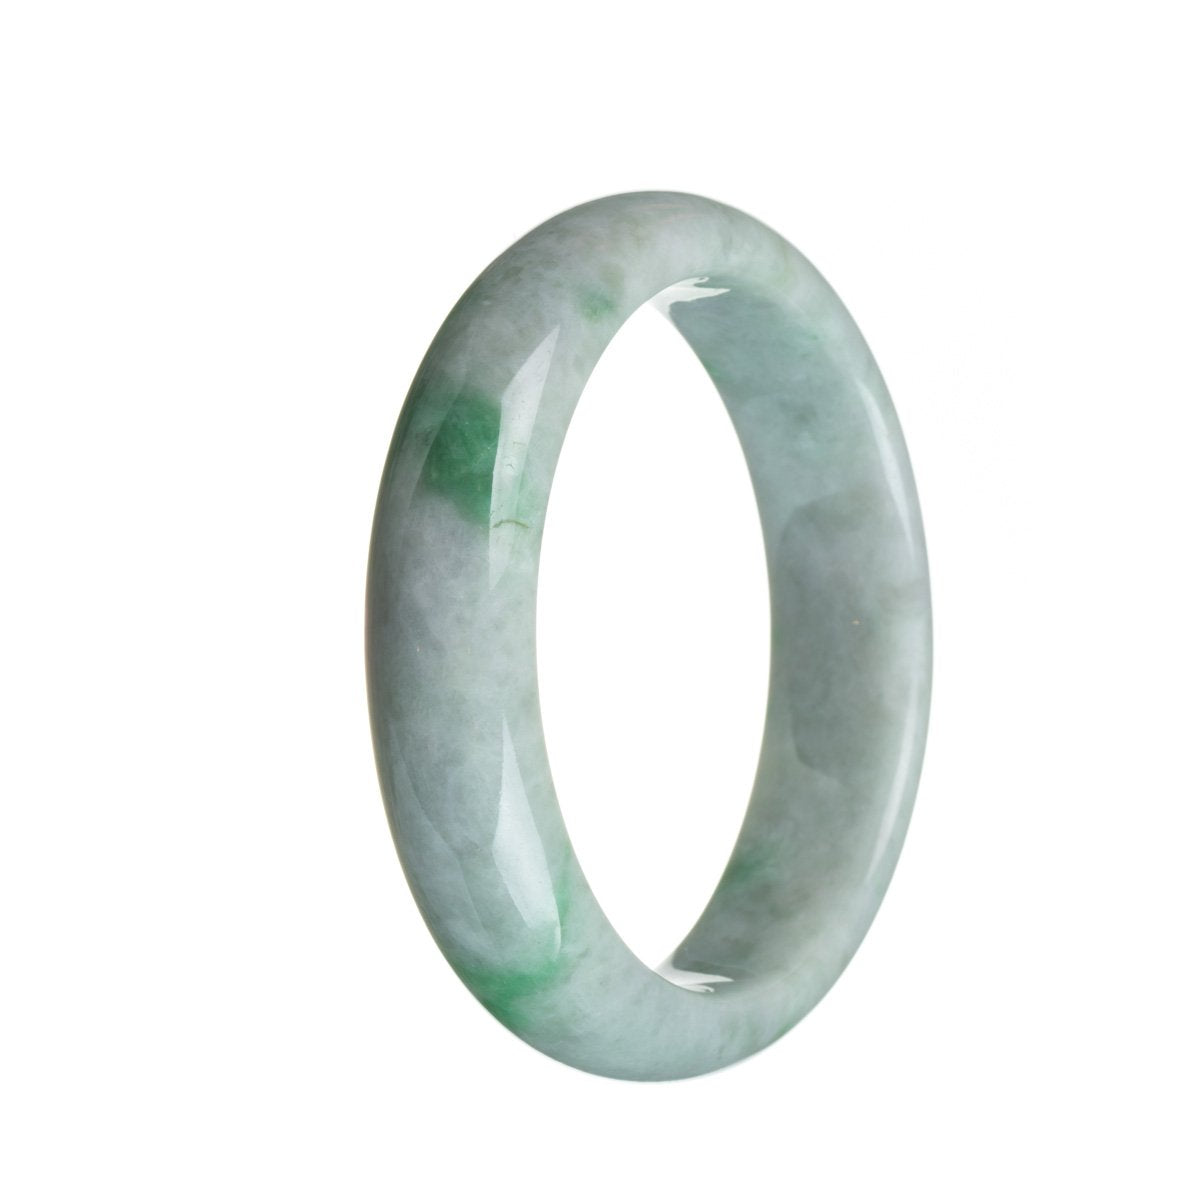 A close-up photo of a green jade bangle bracelet on a white background. The bracelet has a traditional design and is made of high-quality grade A jade. It is in the shape of a half moon and measures 58mm in diameter. The brand name "MAYS" is also mentioned.